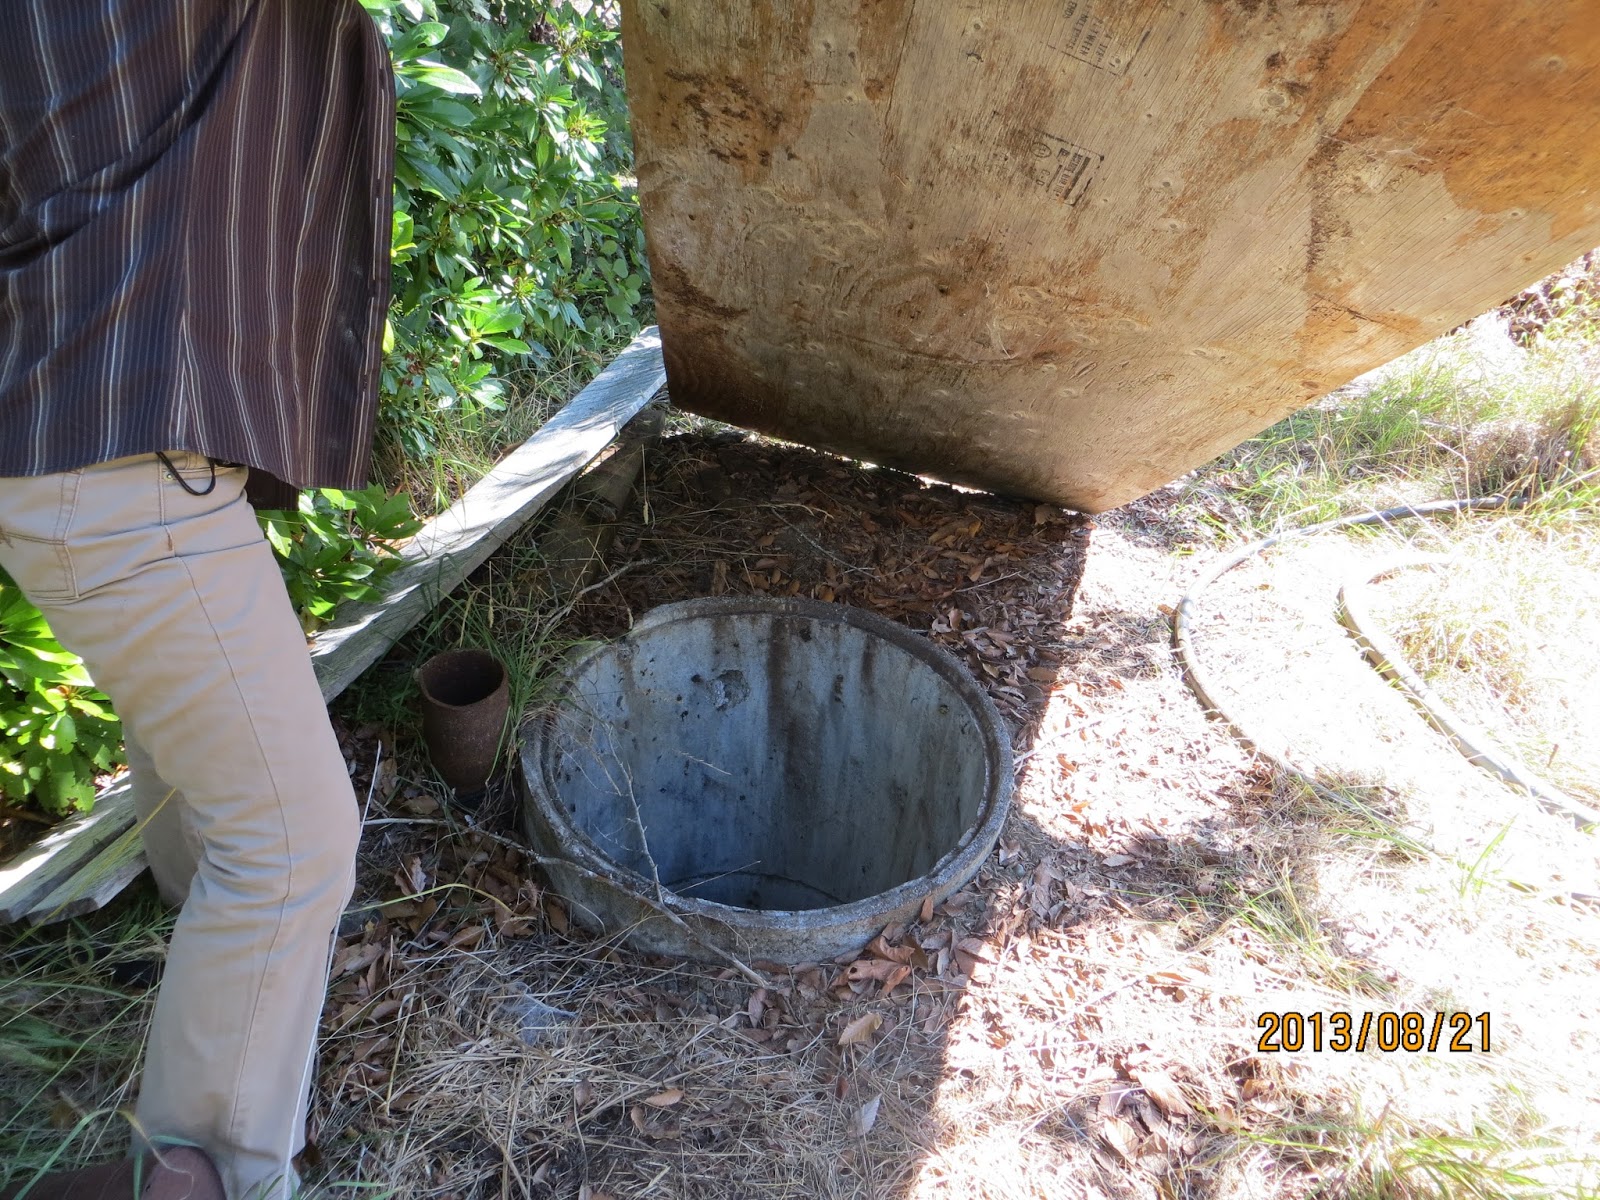 Man lifts a board of wood above an exposed well